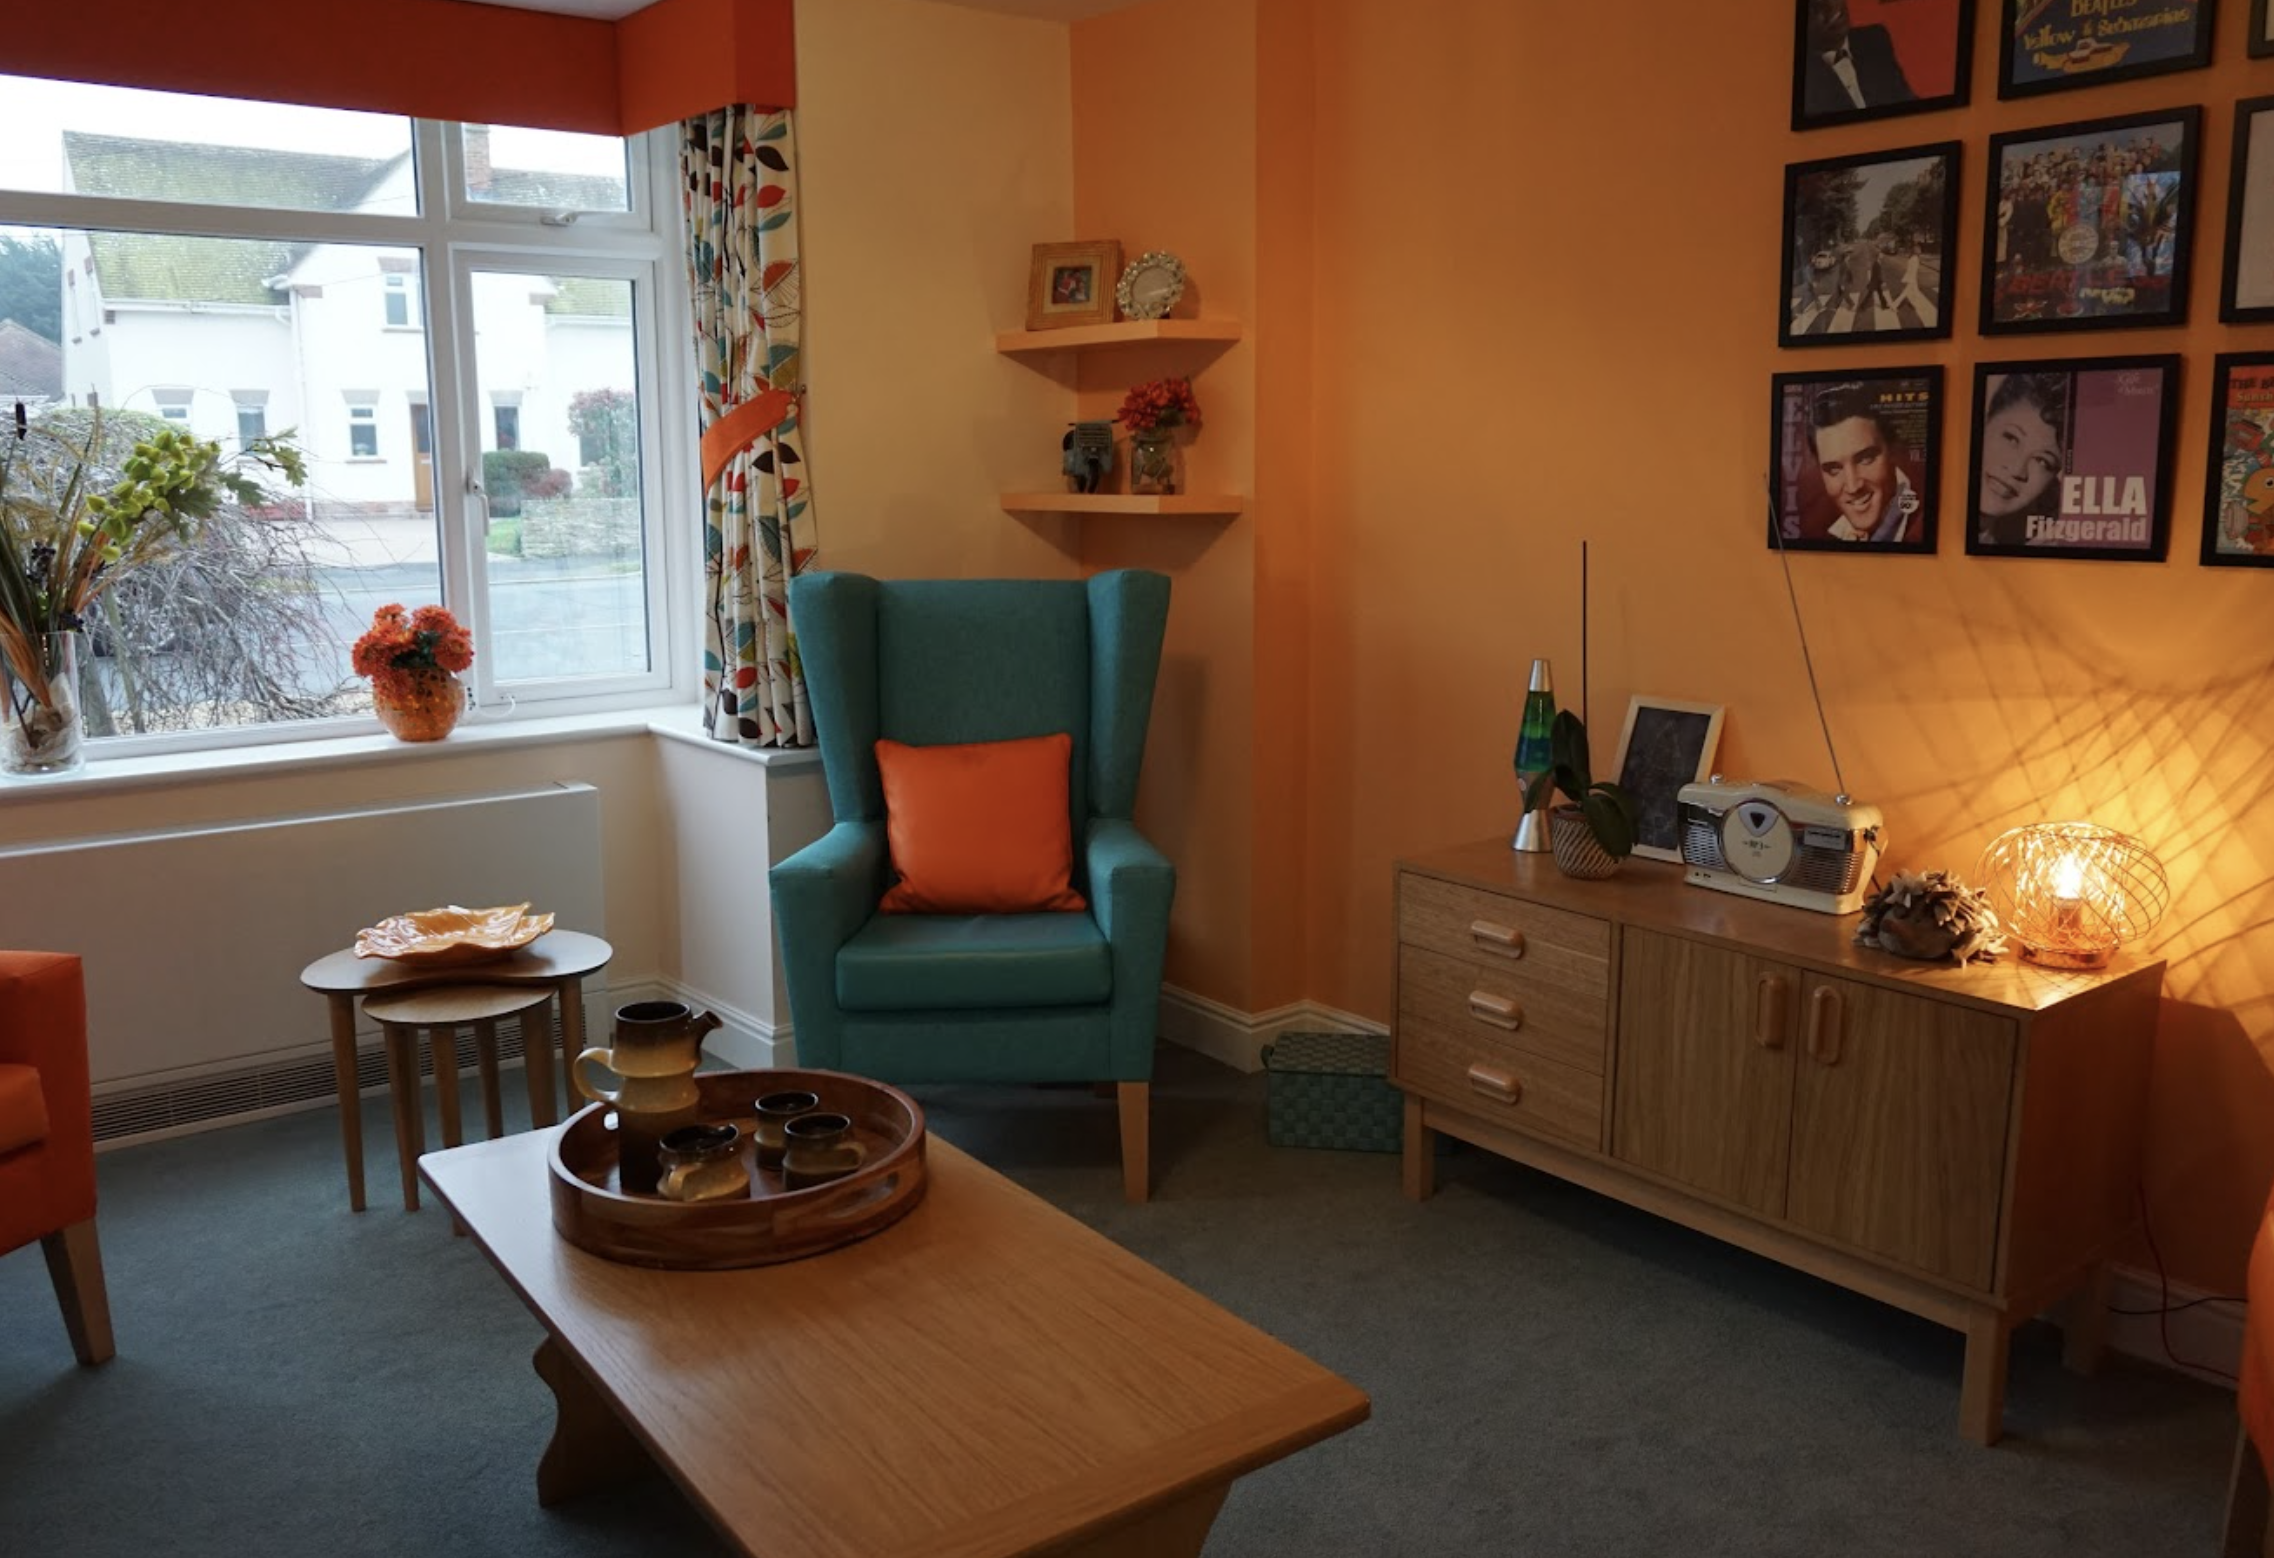 Lounge of Bethel House care home in New Milton, Hampshire